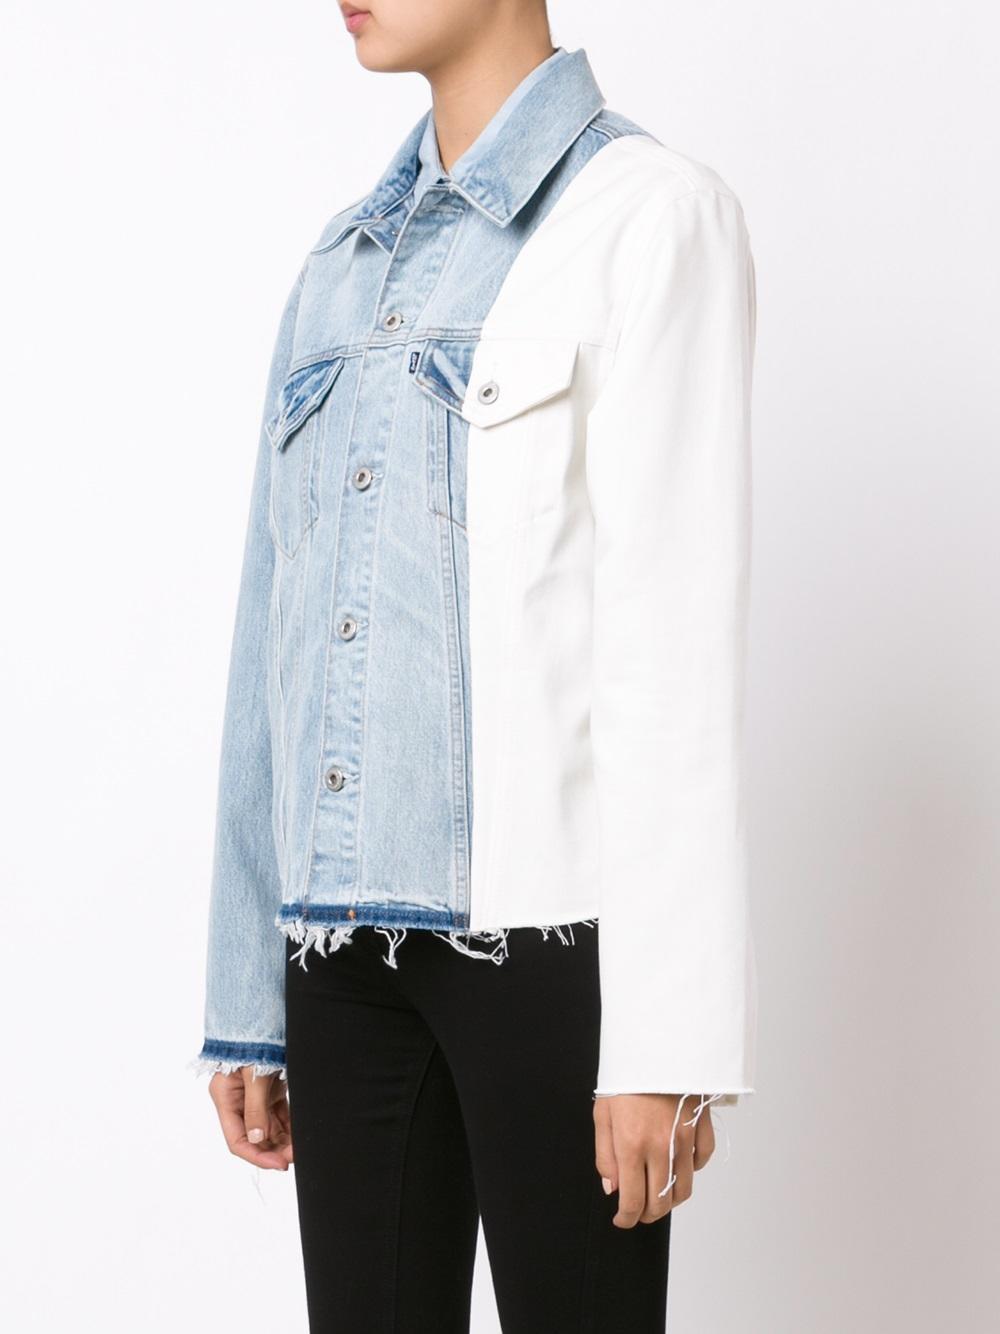 Off-White c/o Virgil Abloh X Levi's Made & Crafted Denim Jacket in Blue |  Lyst